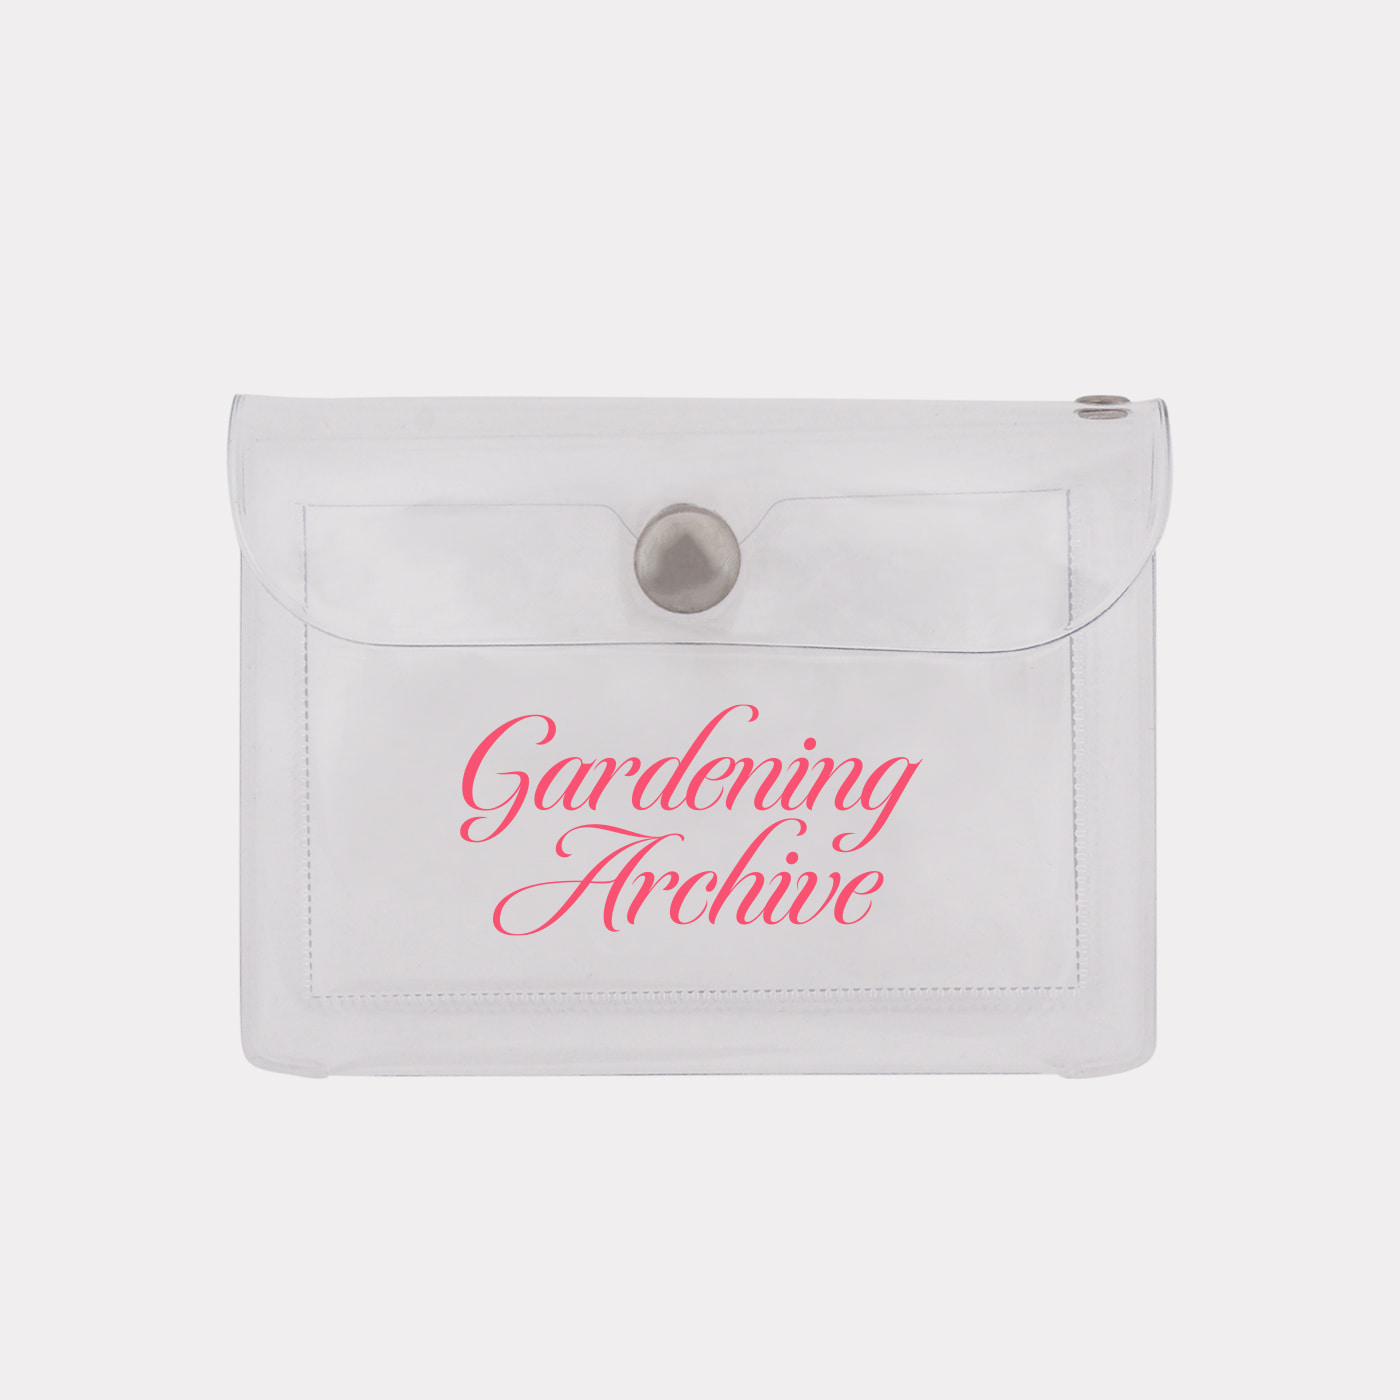 gardening archive pvc pouch